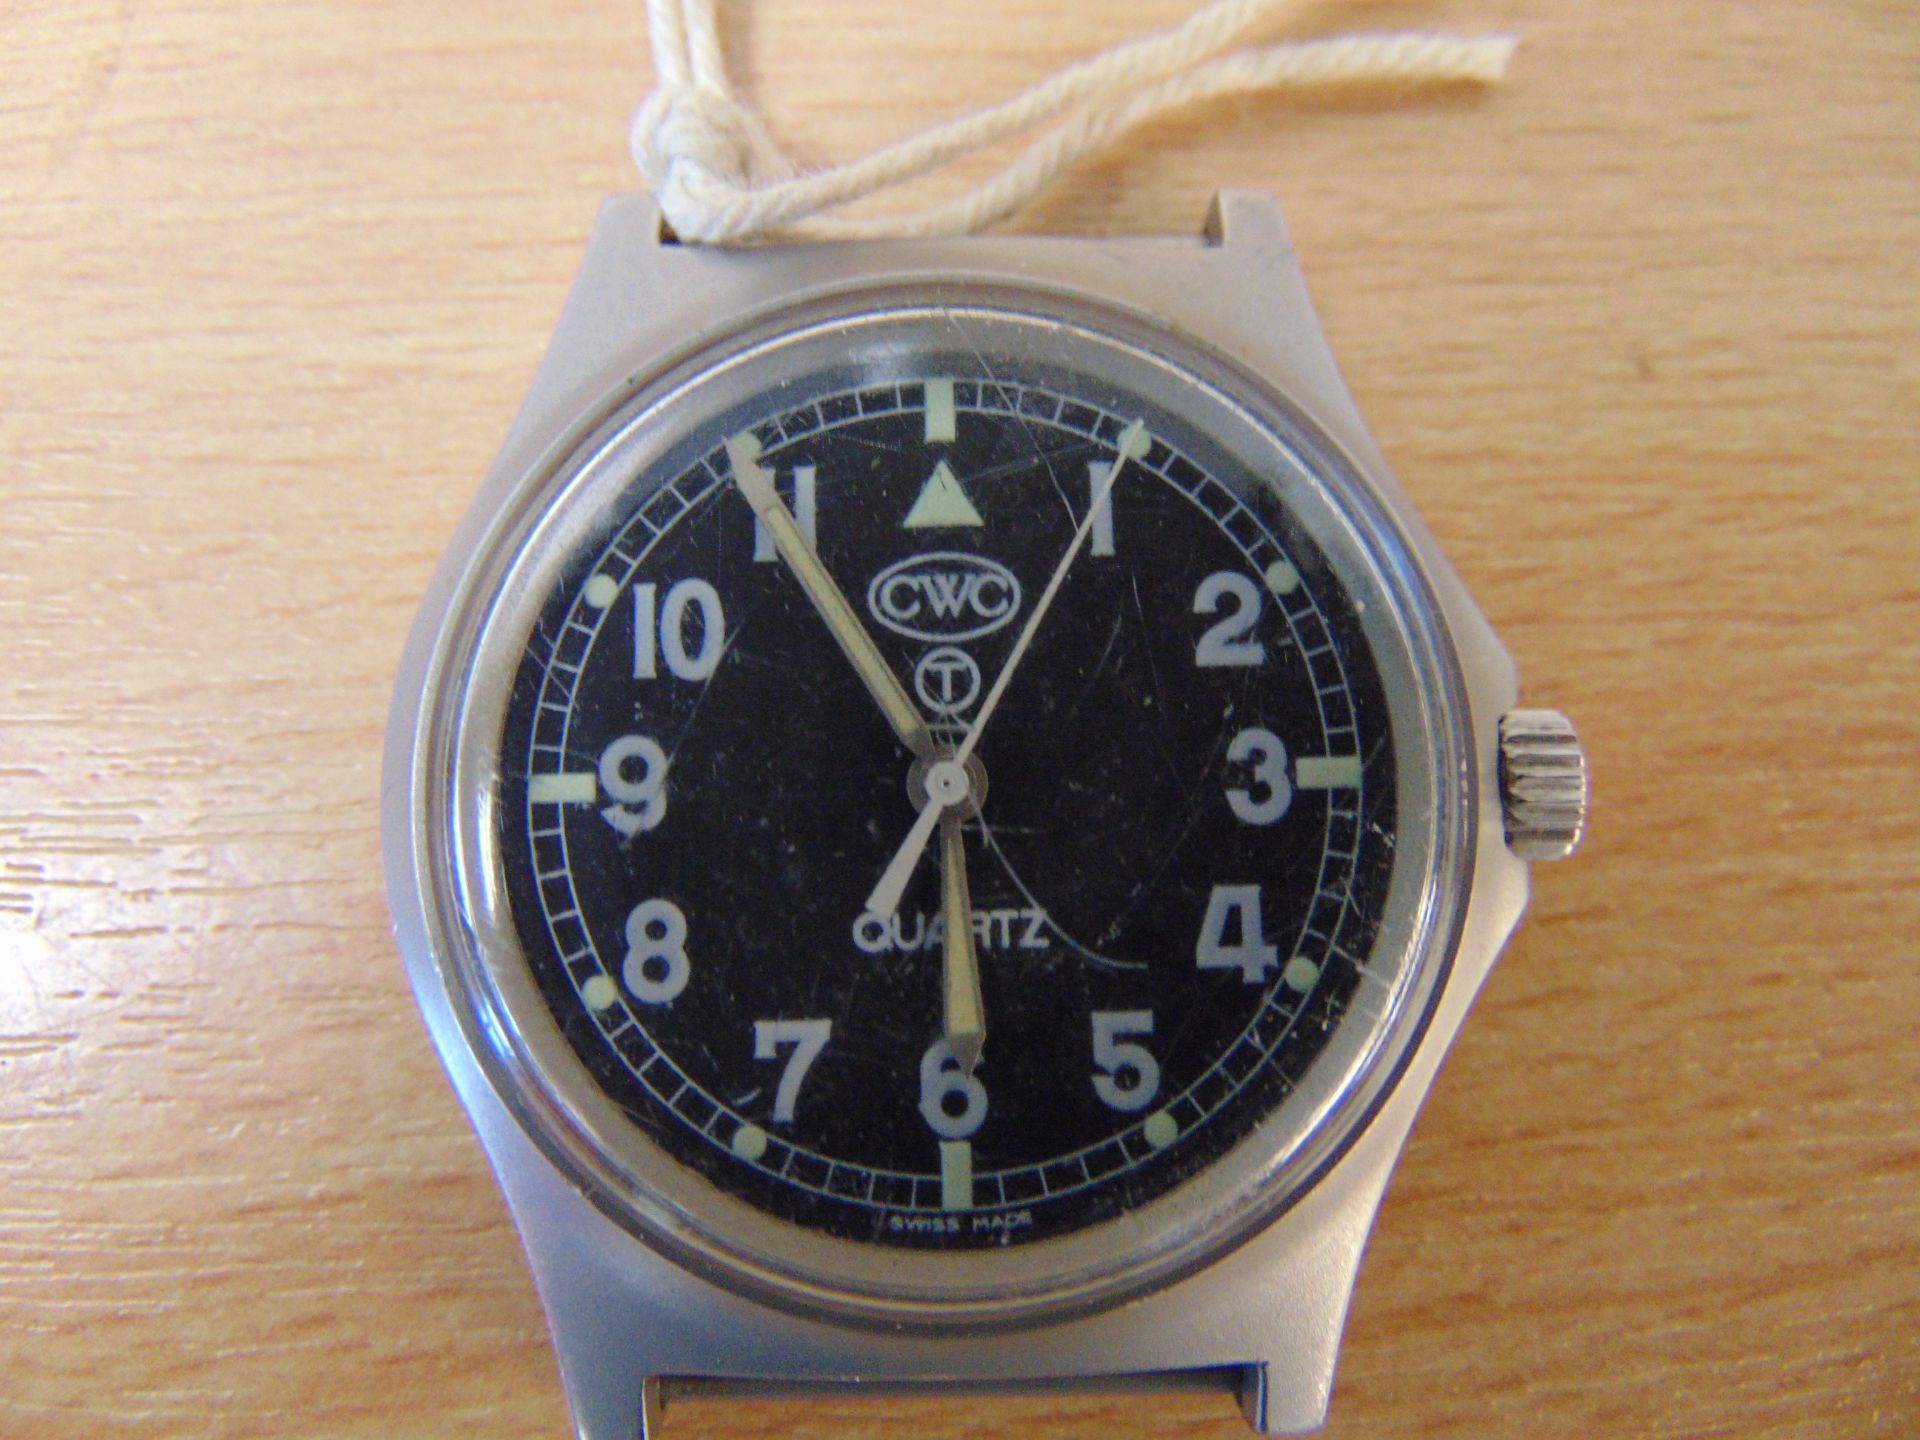 0552 CWC Royal Marines / Navy issue service watch, Nato Marks Date 1989 - Image 2 of 4